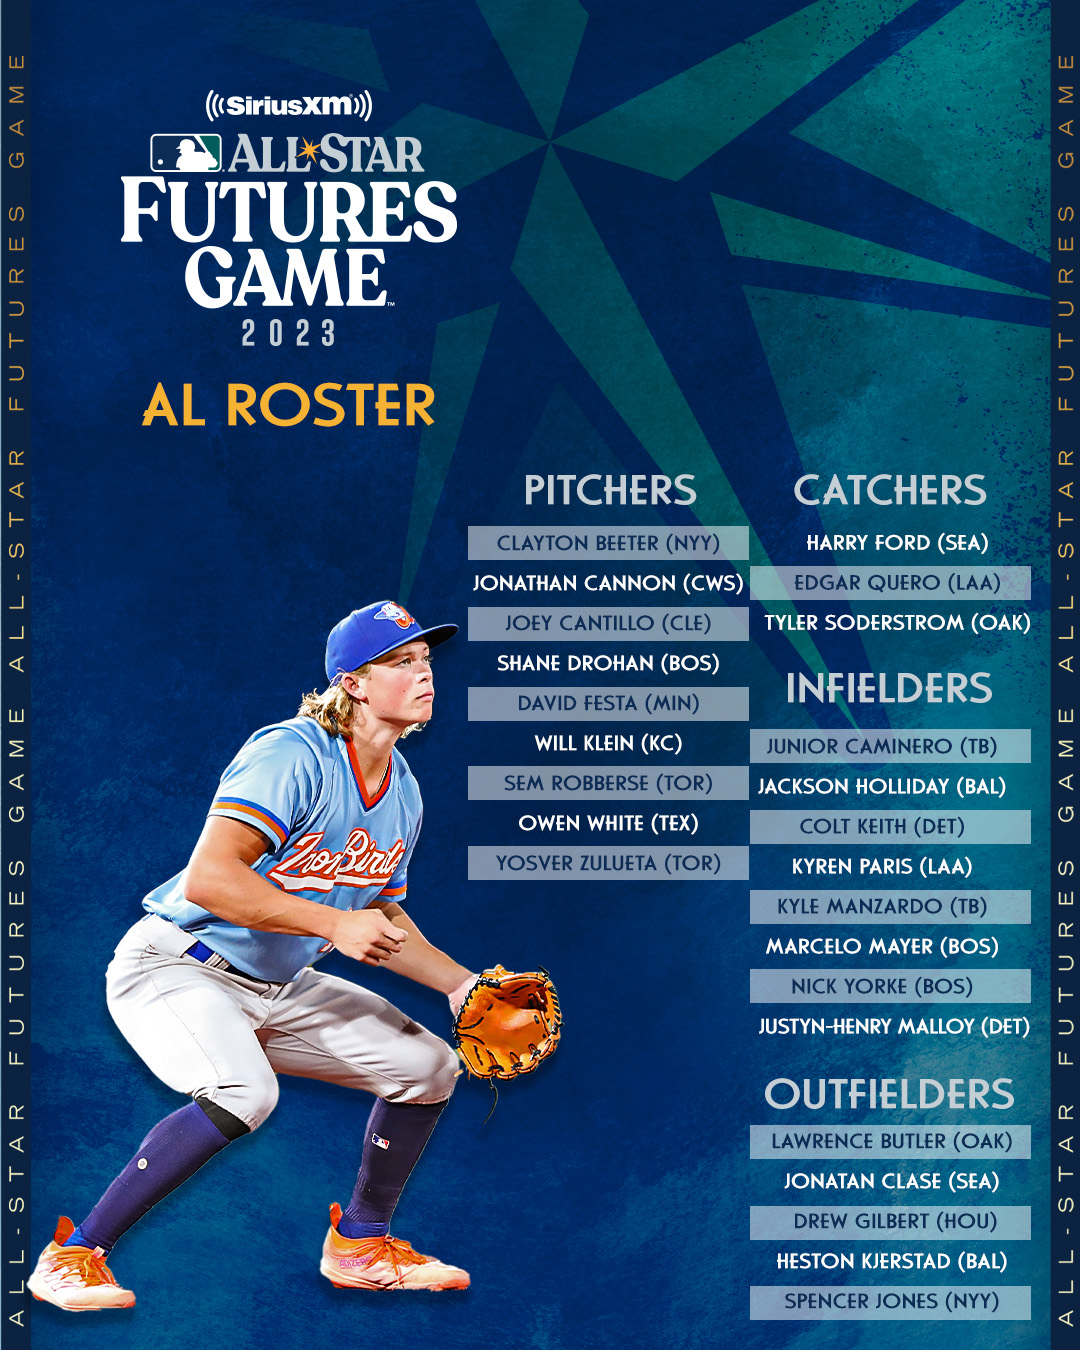 star futures game